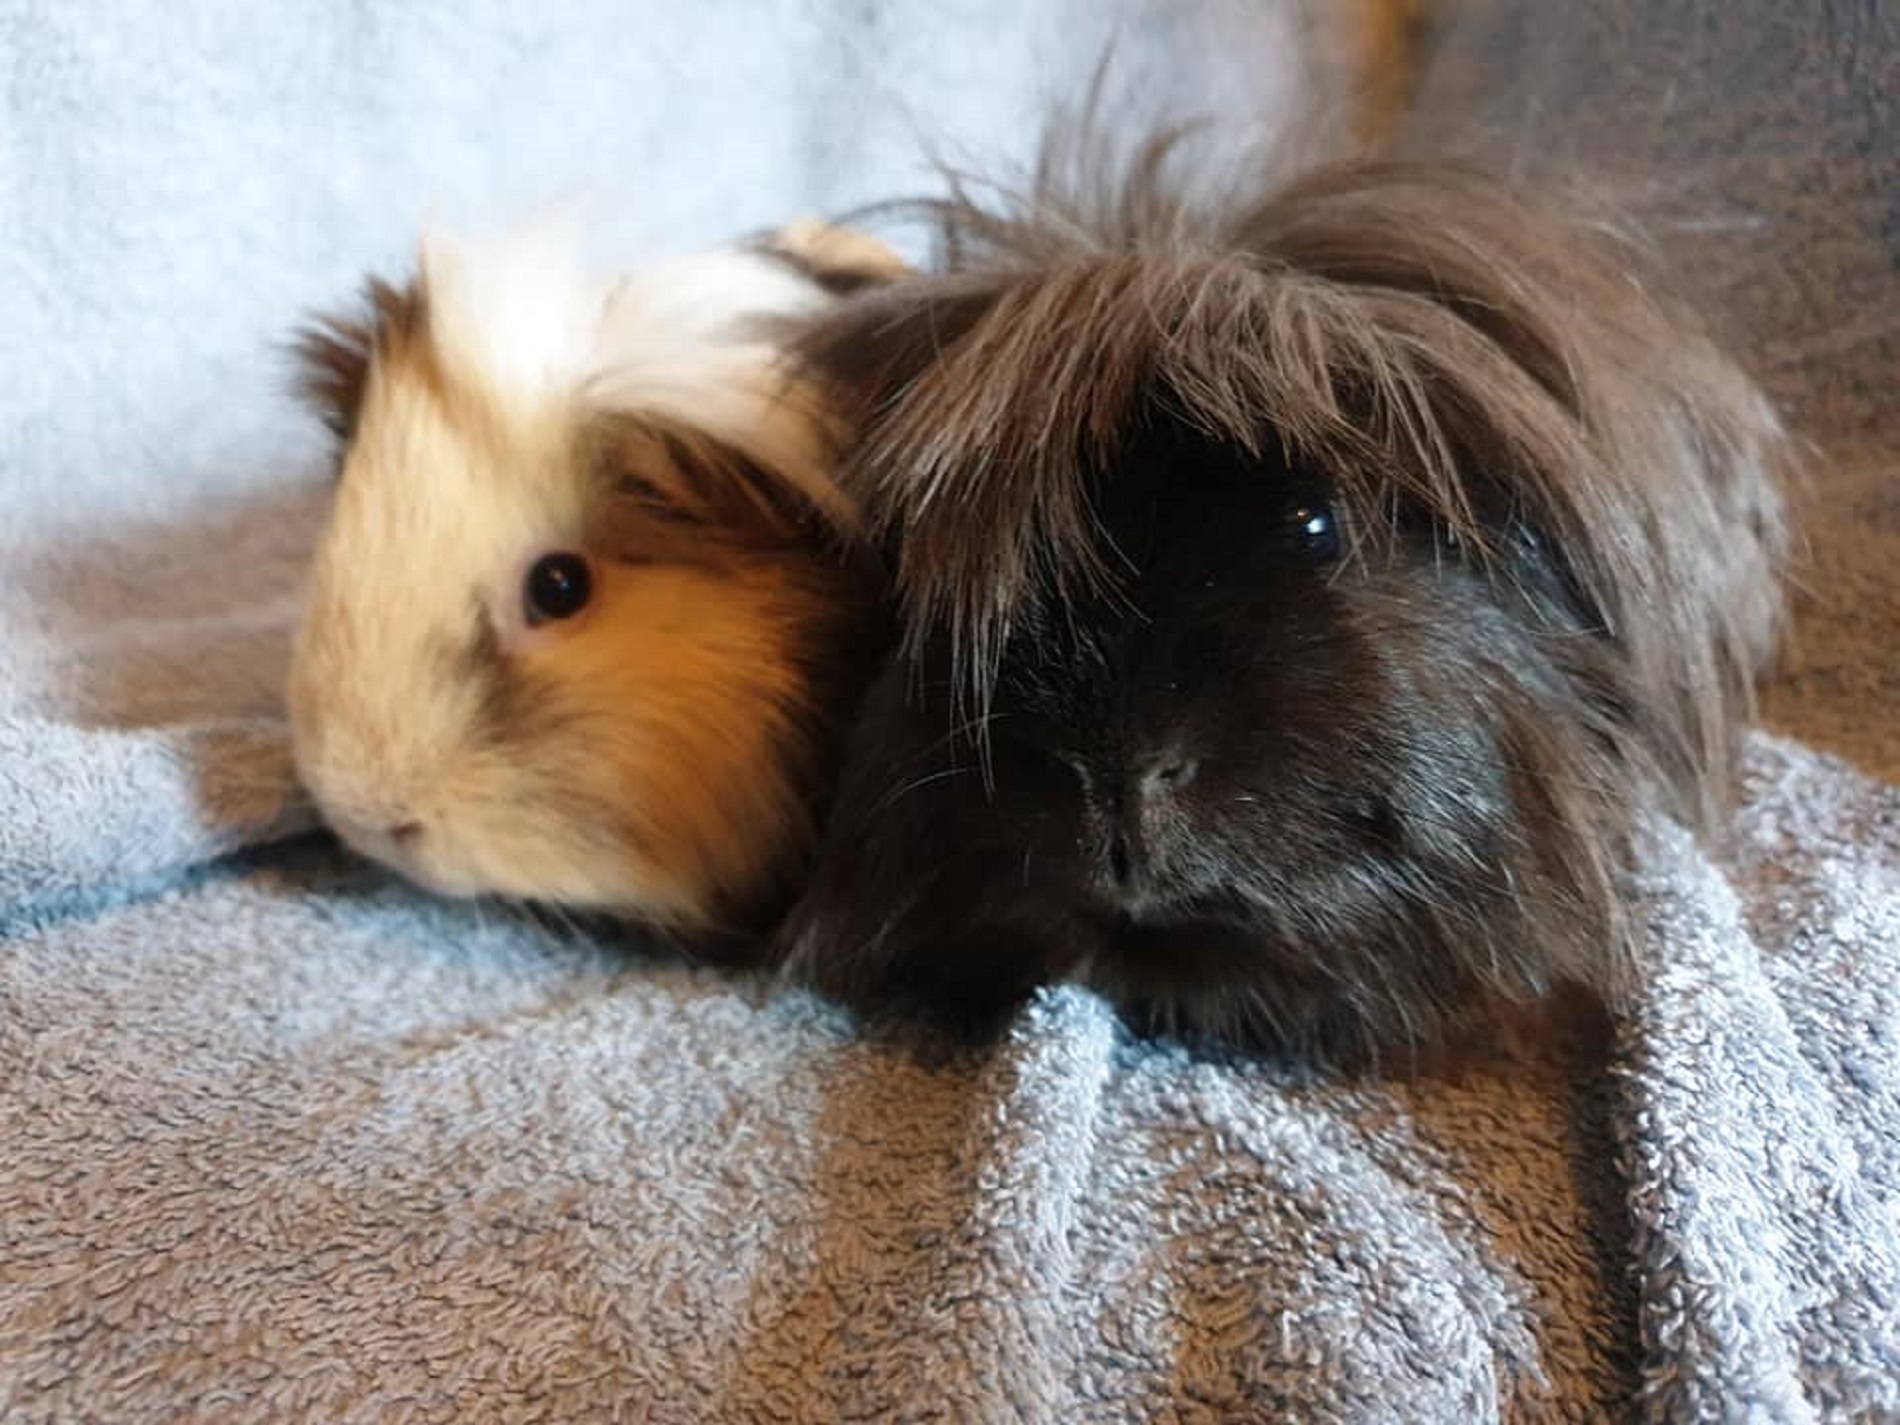 BEN & COCONUT (was FLUFFY) May 6th 2020